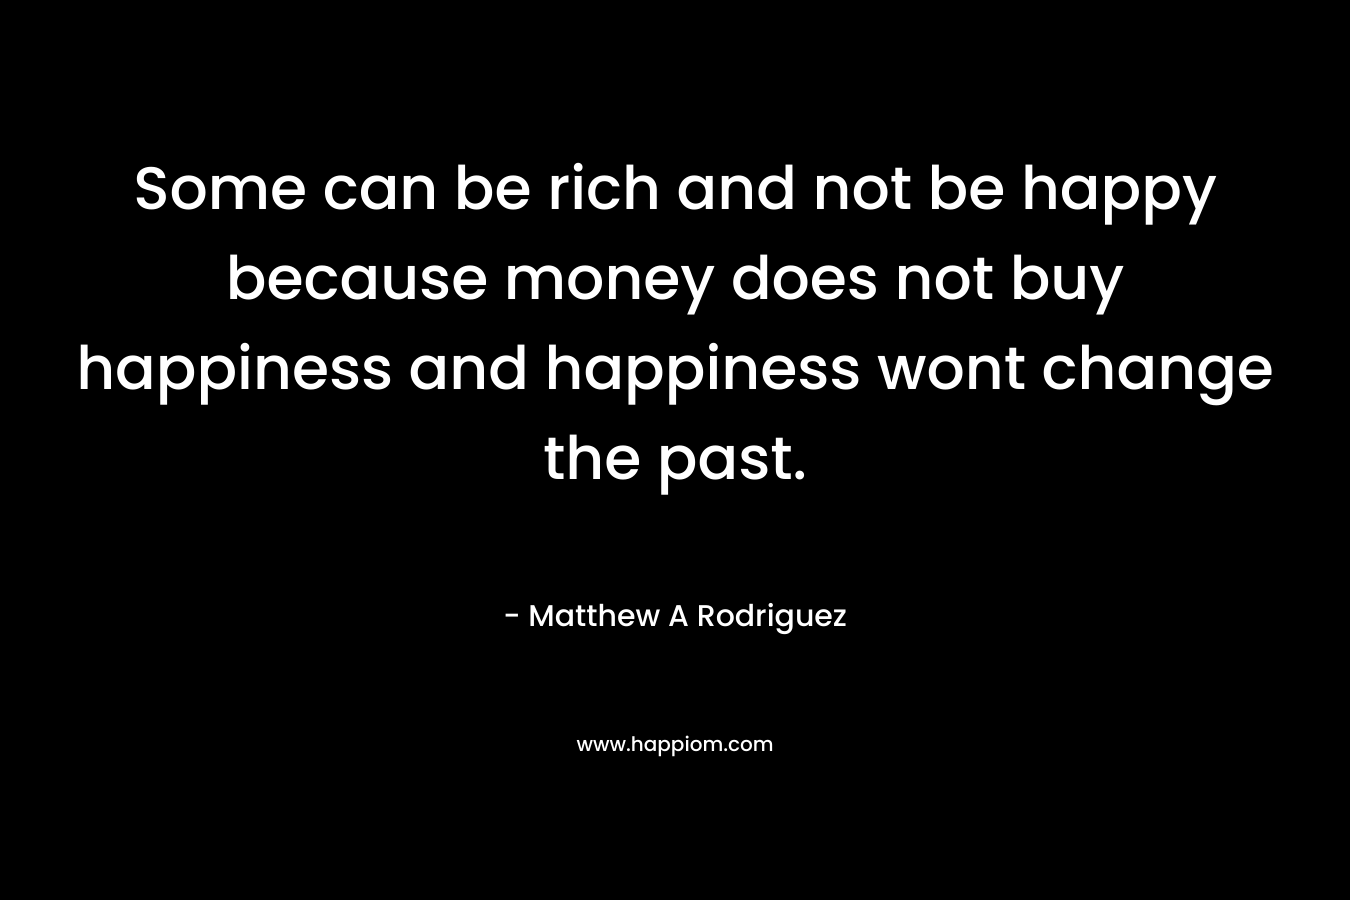 Some can be rich and not be happy because money does not buy happiness and happiness wont change the past.